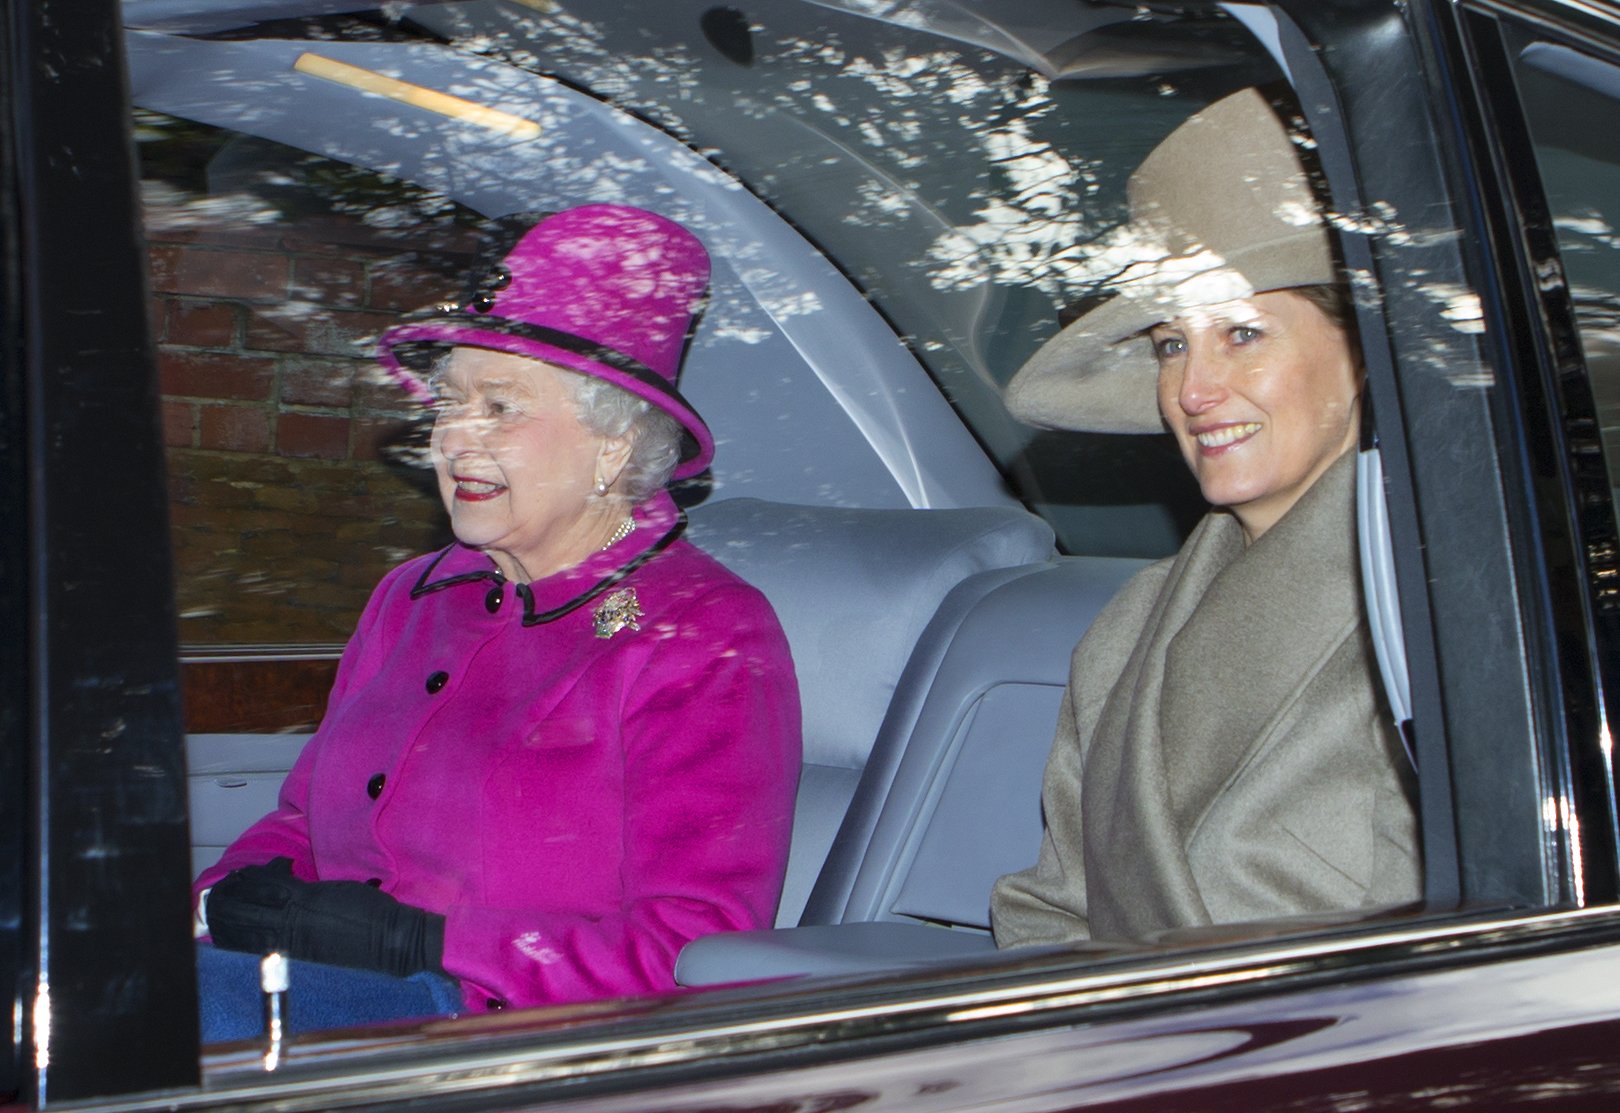 Queen Elizabeth II and Sophie,Countess of Wessex leave St. Mary Magdalene Church, Sandringham in Queen Elizabeth's Bentley car after attending Sunday service on December 30, 2012 near King's Lynn, England | Source: Getty Images 